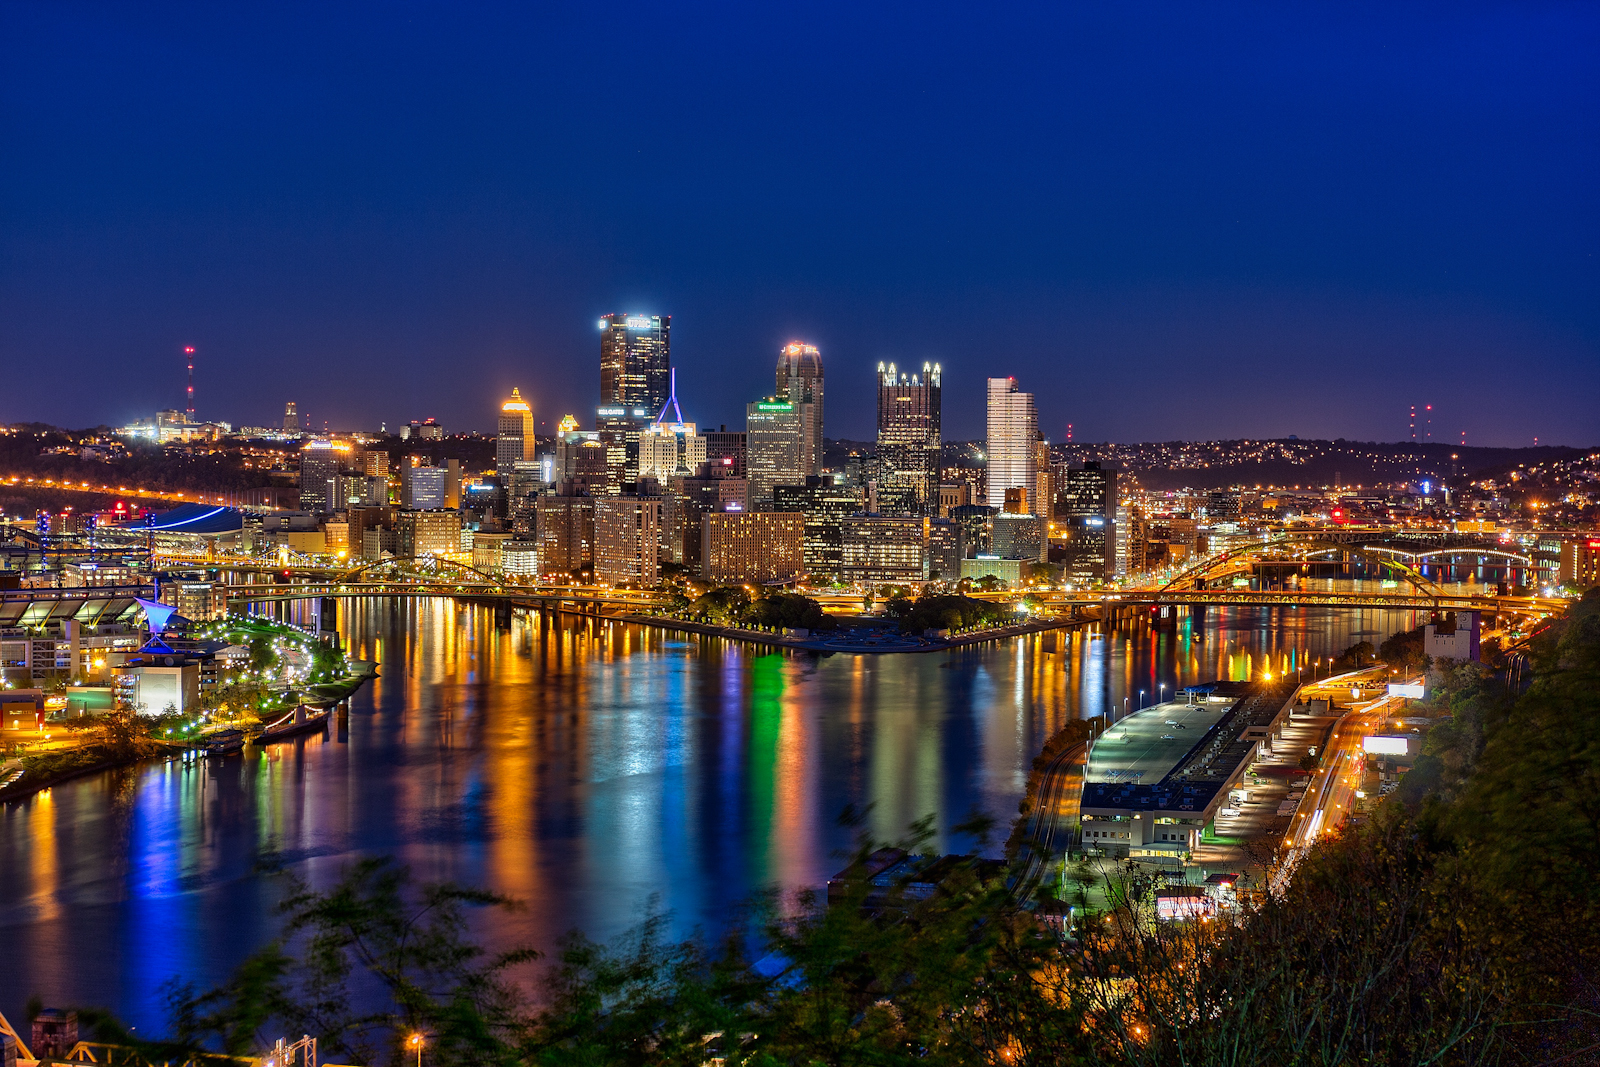  photo is from the West End Overlook in Pittsburgh Pennsylvania